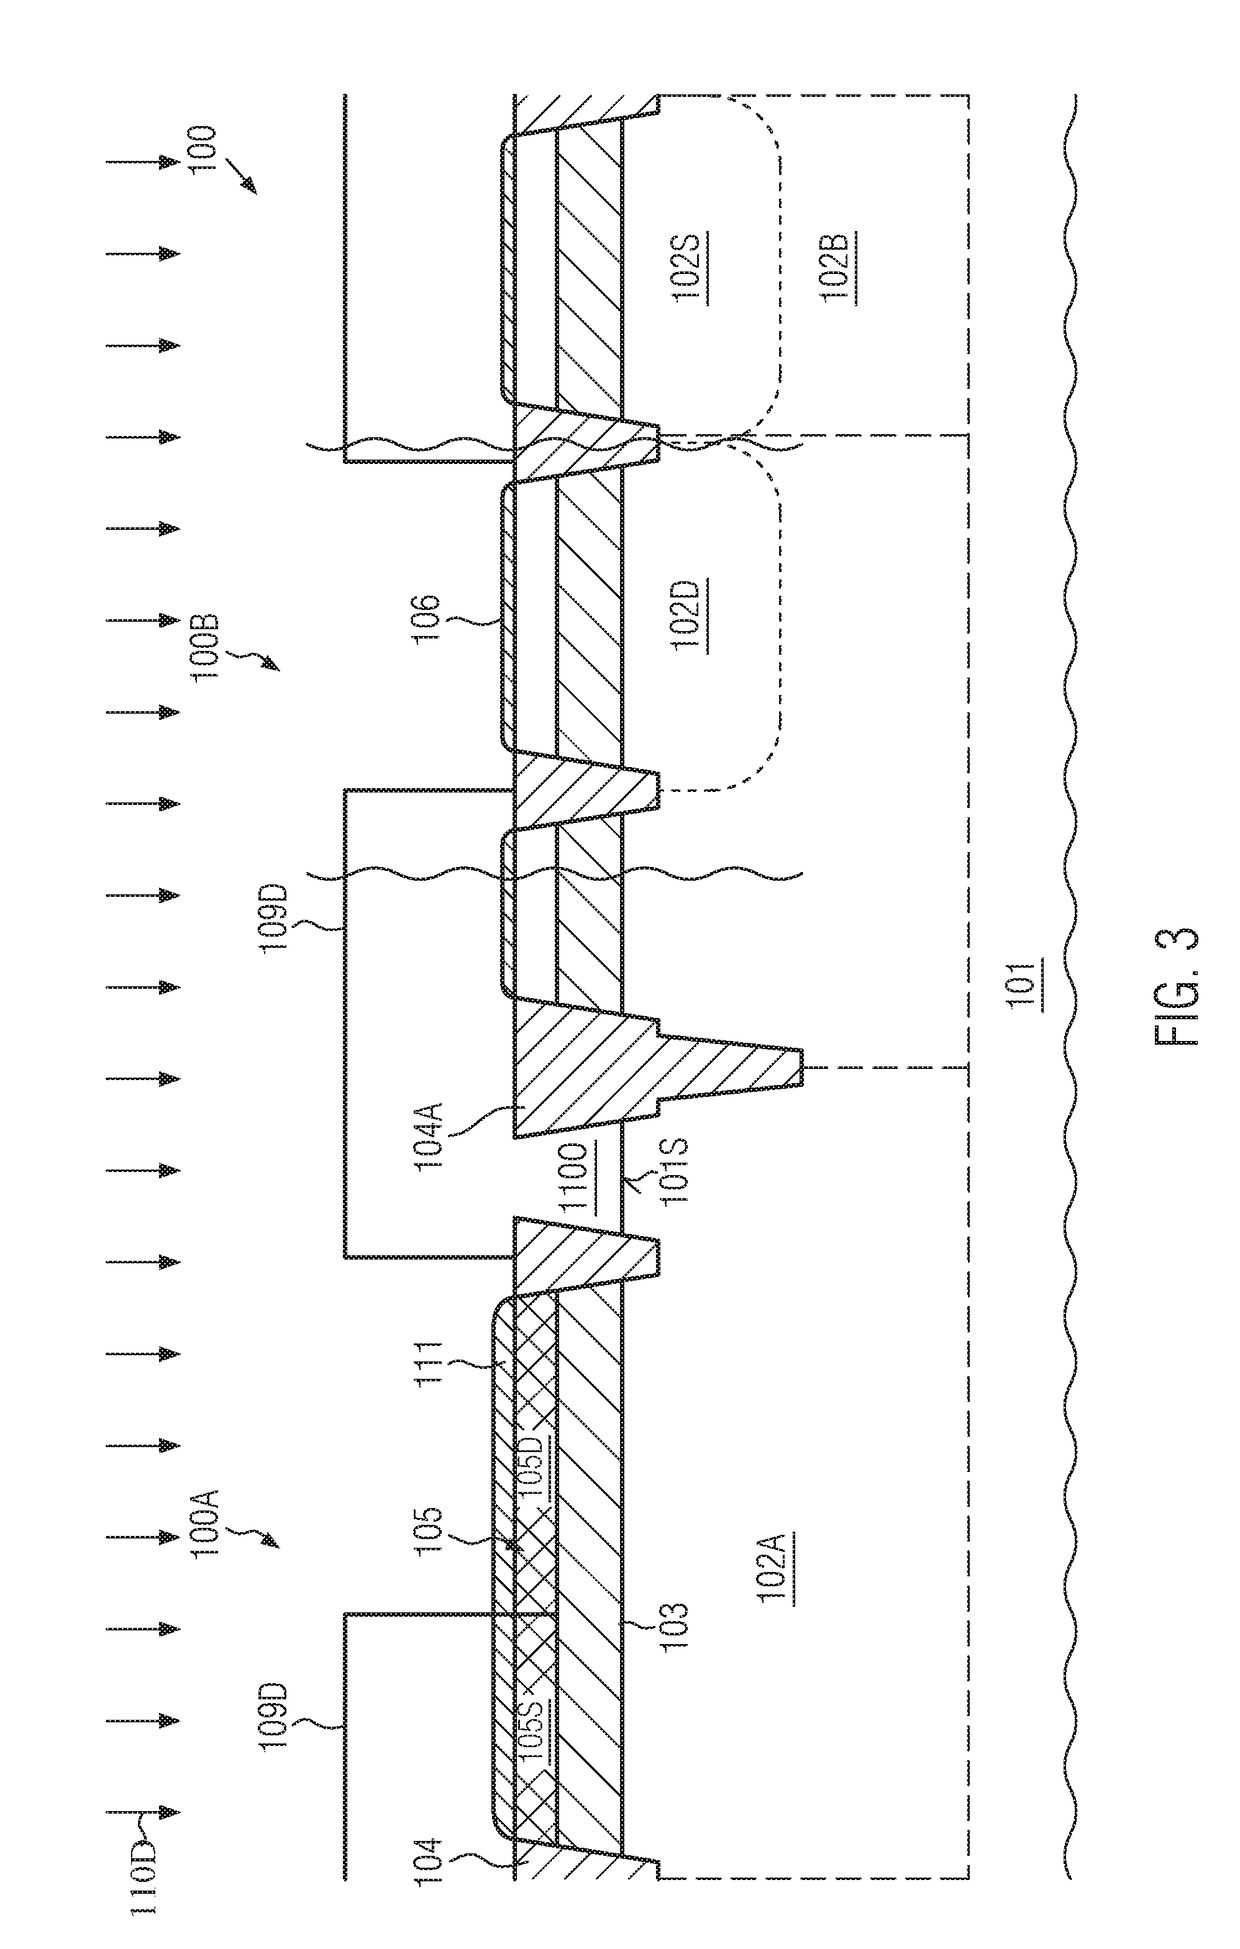 Laterally diffused field effect transistor in soi configuration